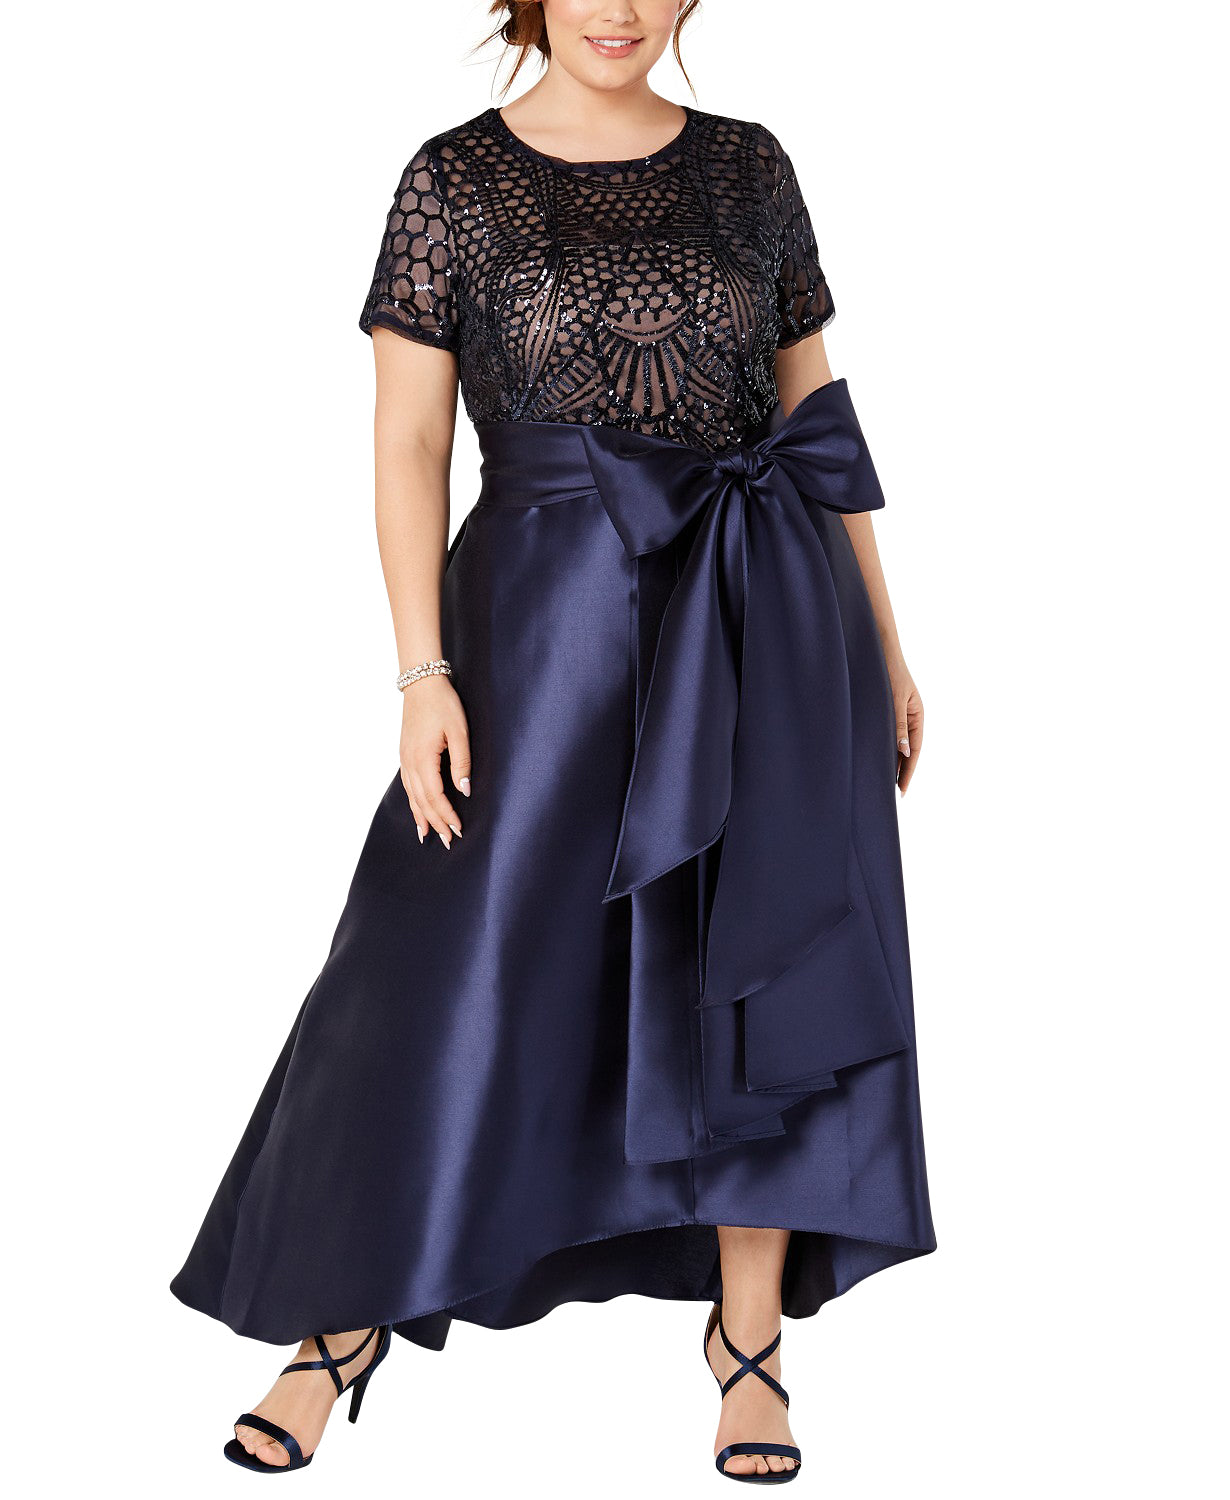 Women's Plus Size Short Sleeve Sequin-Embellished High-Low Gown- Mother of The Groom Dress